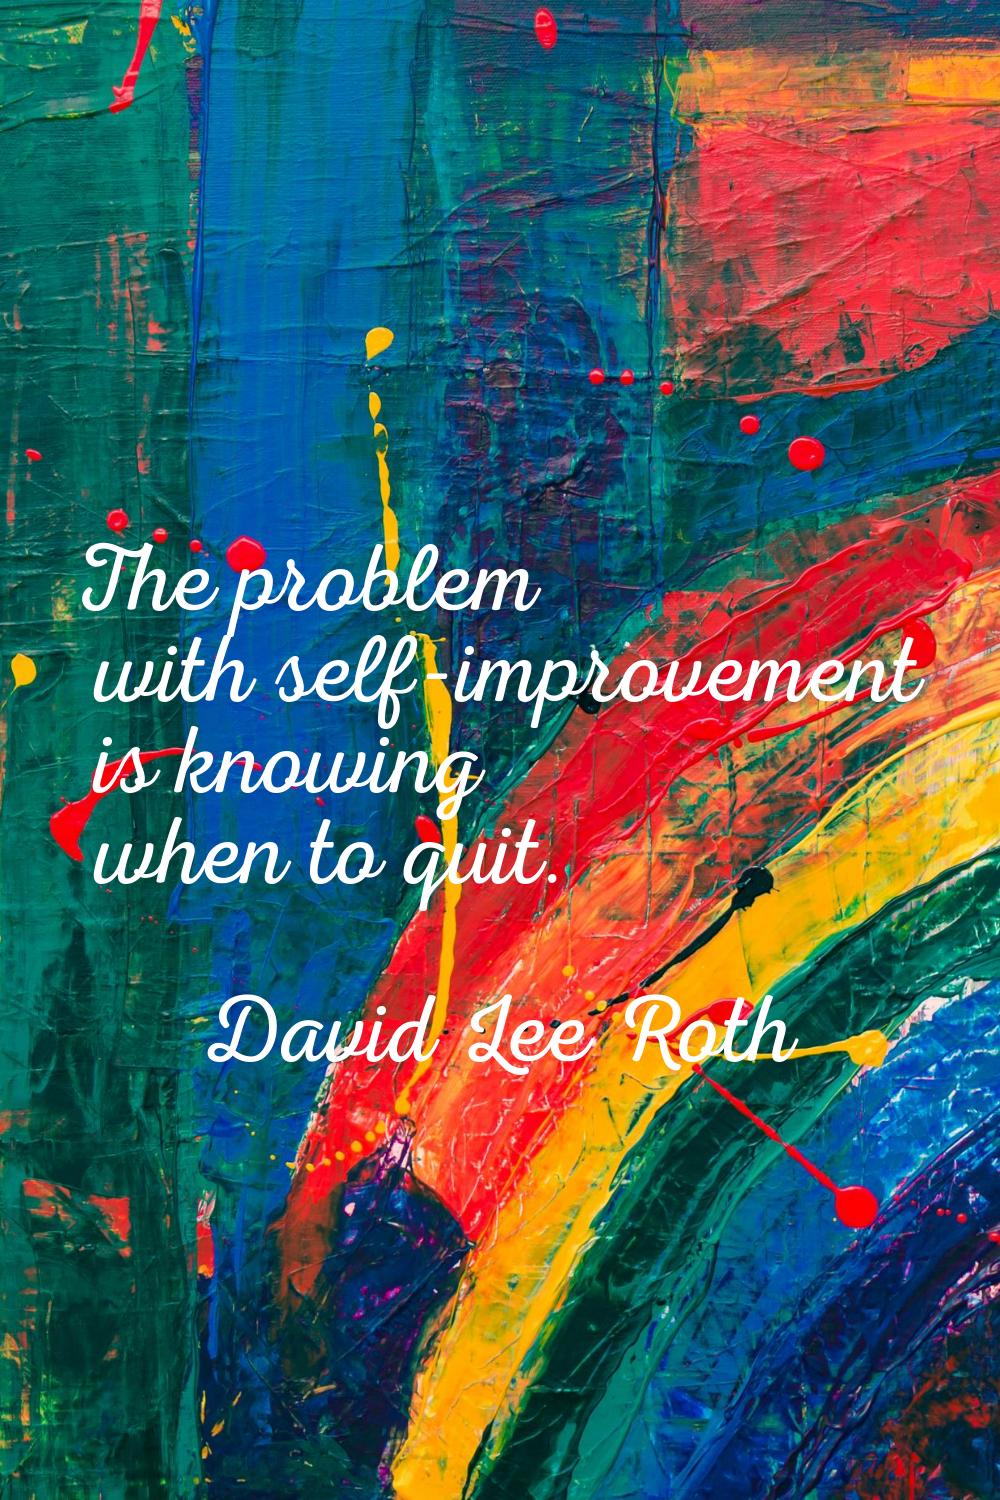 The problem with self-improvement is knowing when to quit.